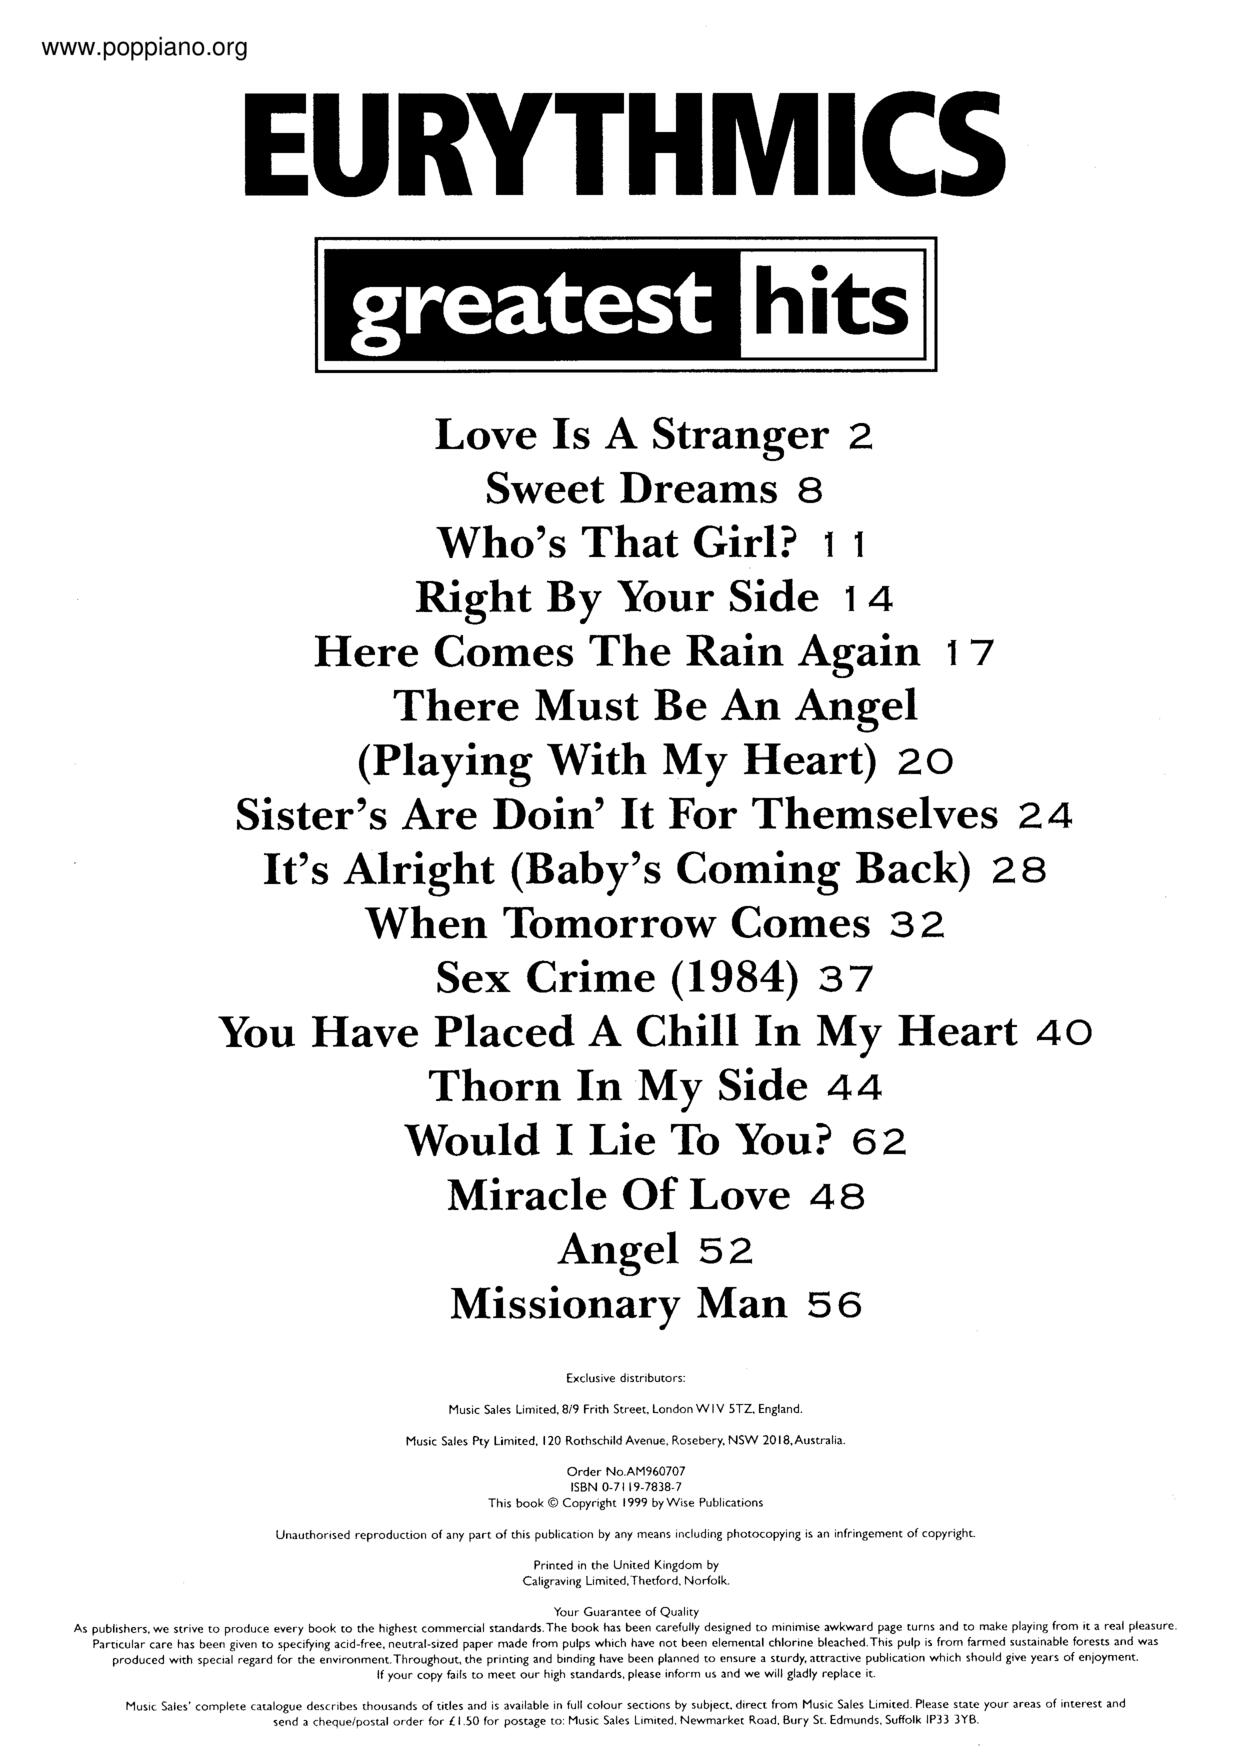 Eurythmics Greatest Hits 64 Pages琴谱